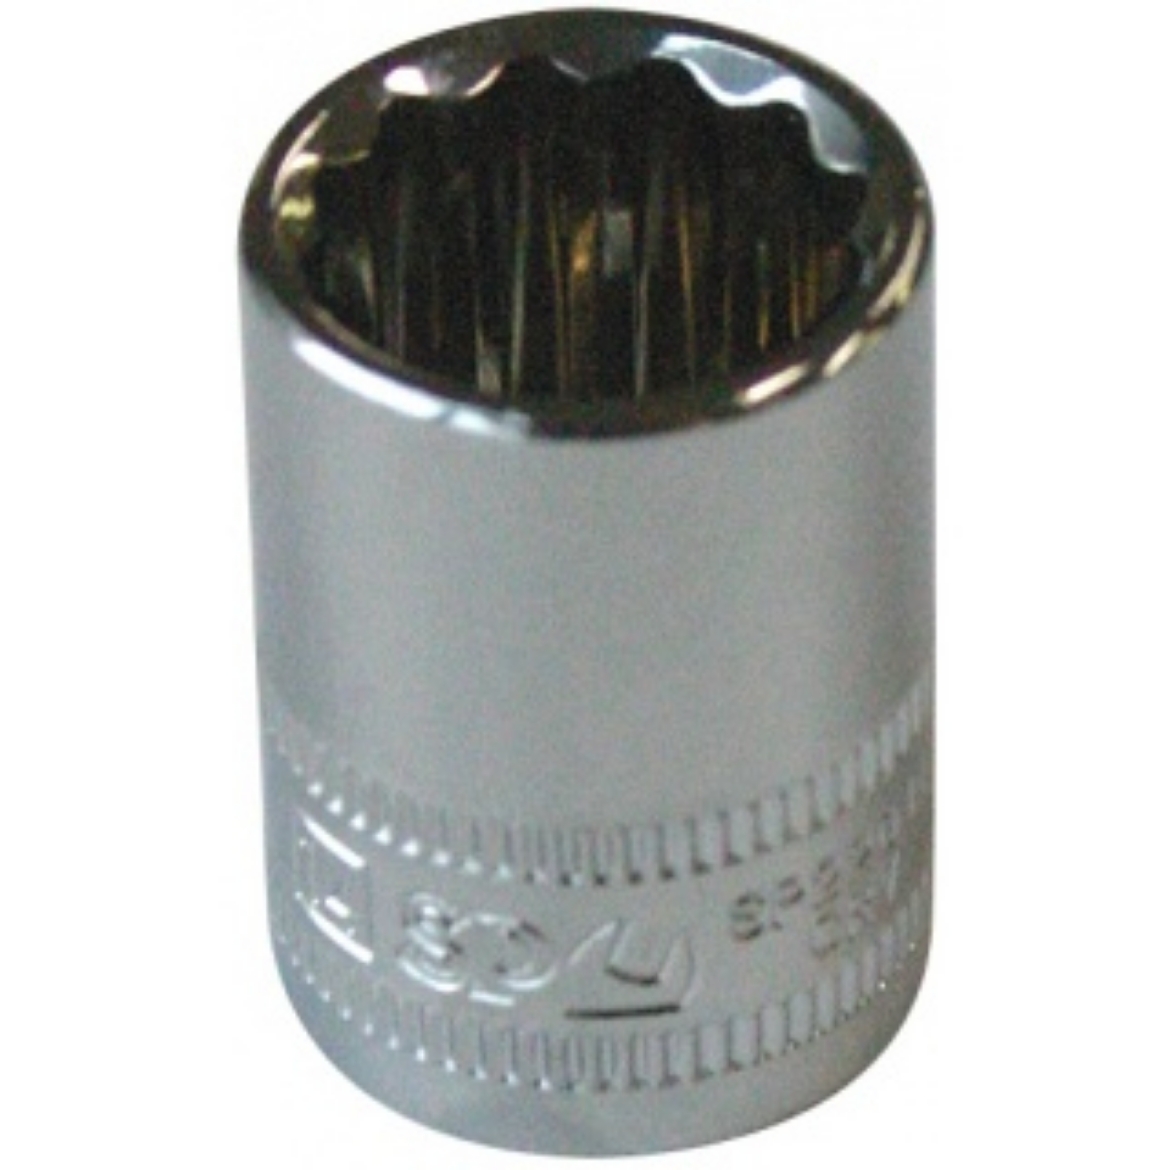 Picture of SOCKET 3/8"DR 12PT METRIC 8MM SP TOOLS